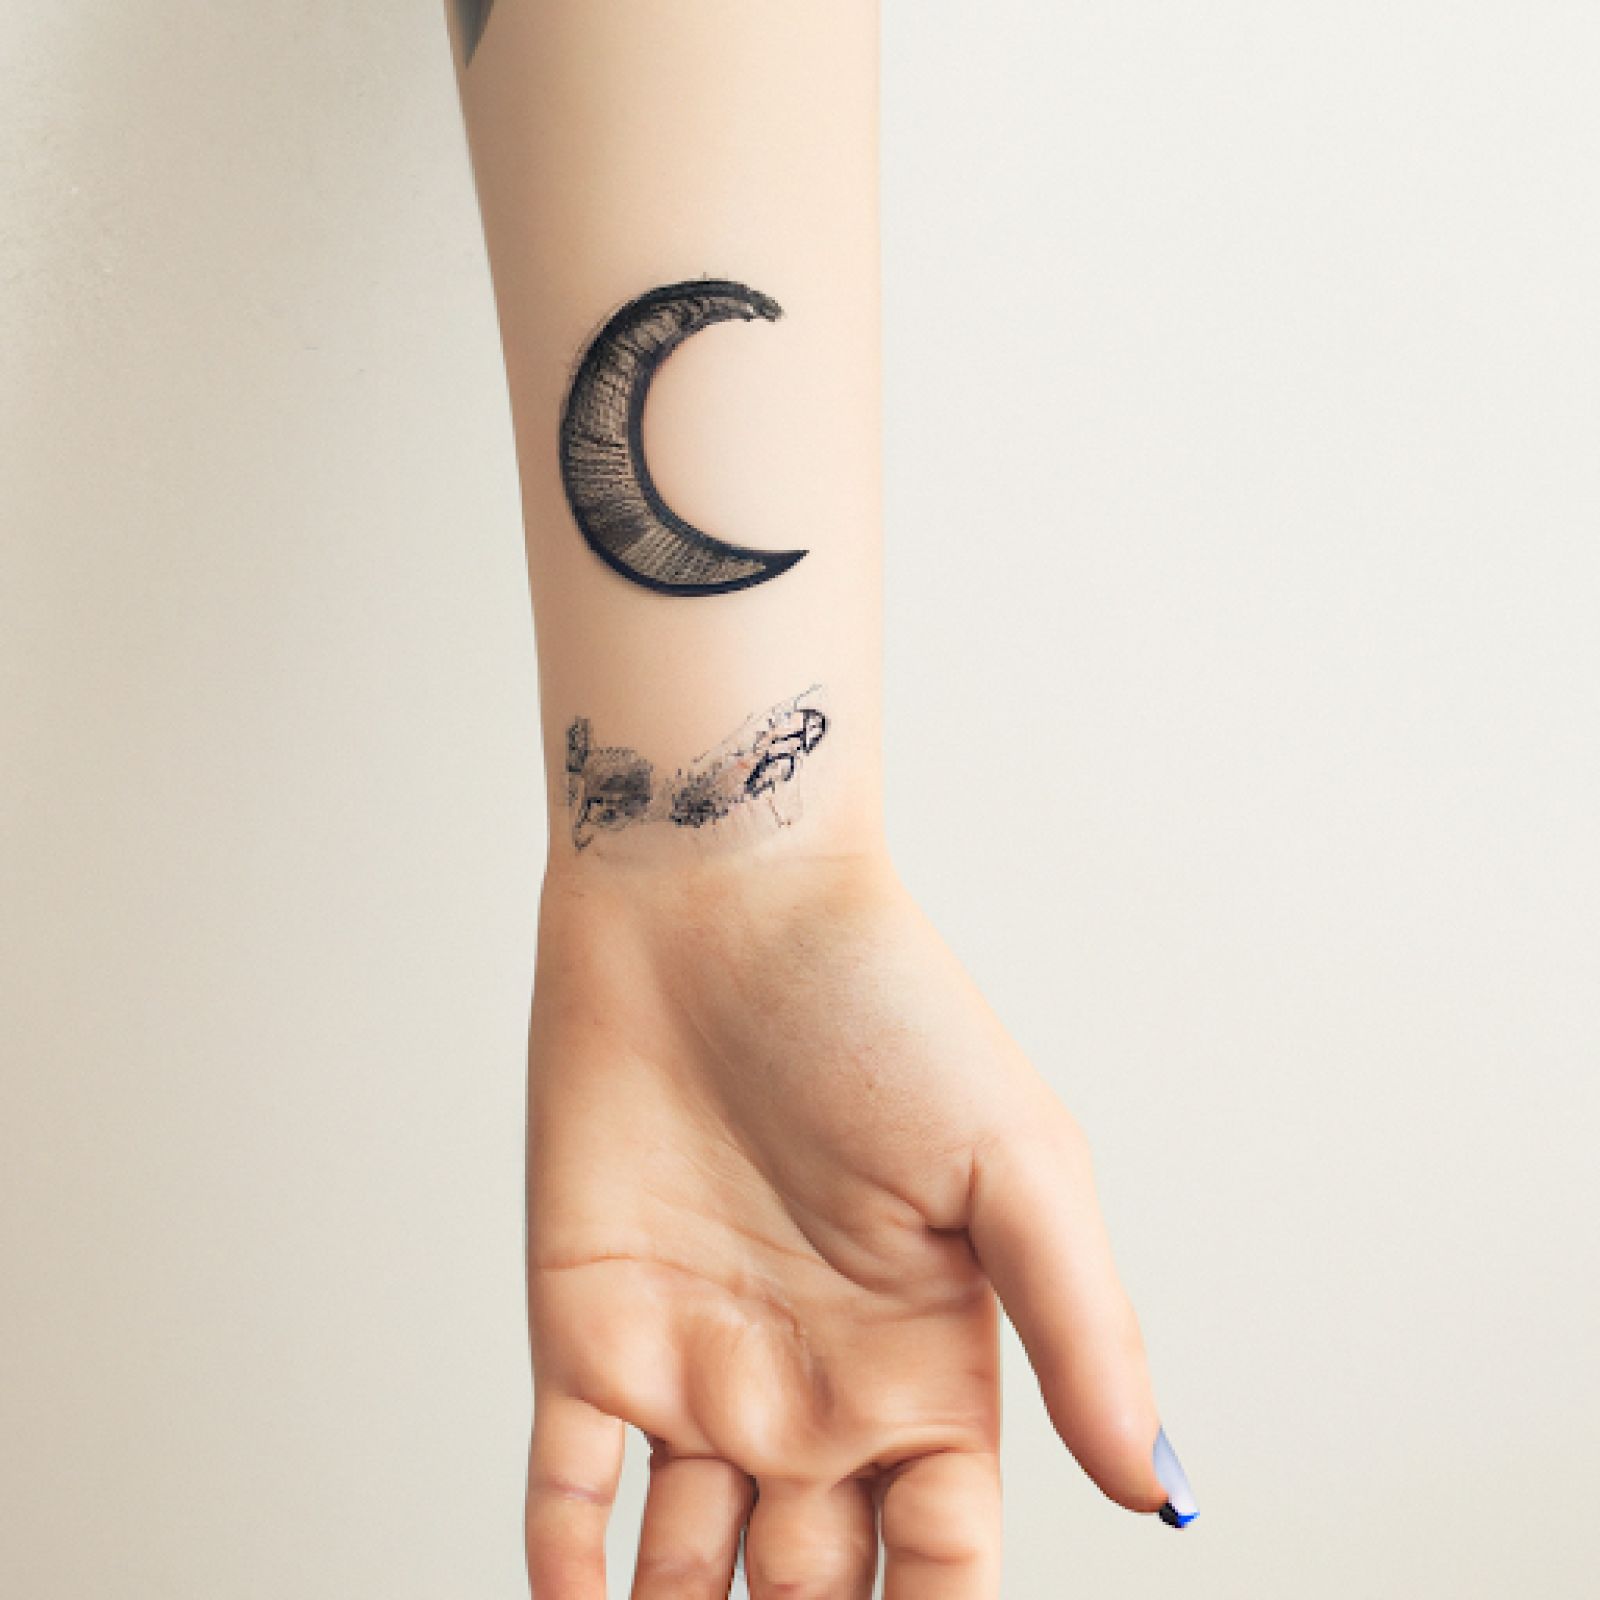 Moon phases tattoo on hand for women